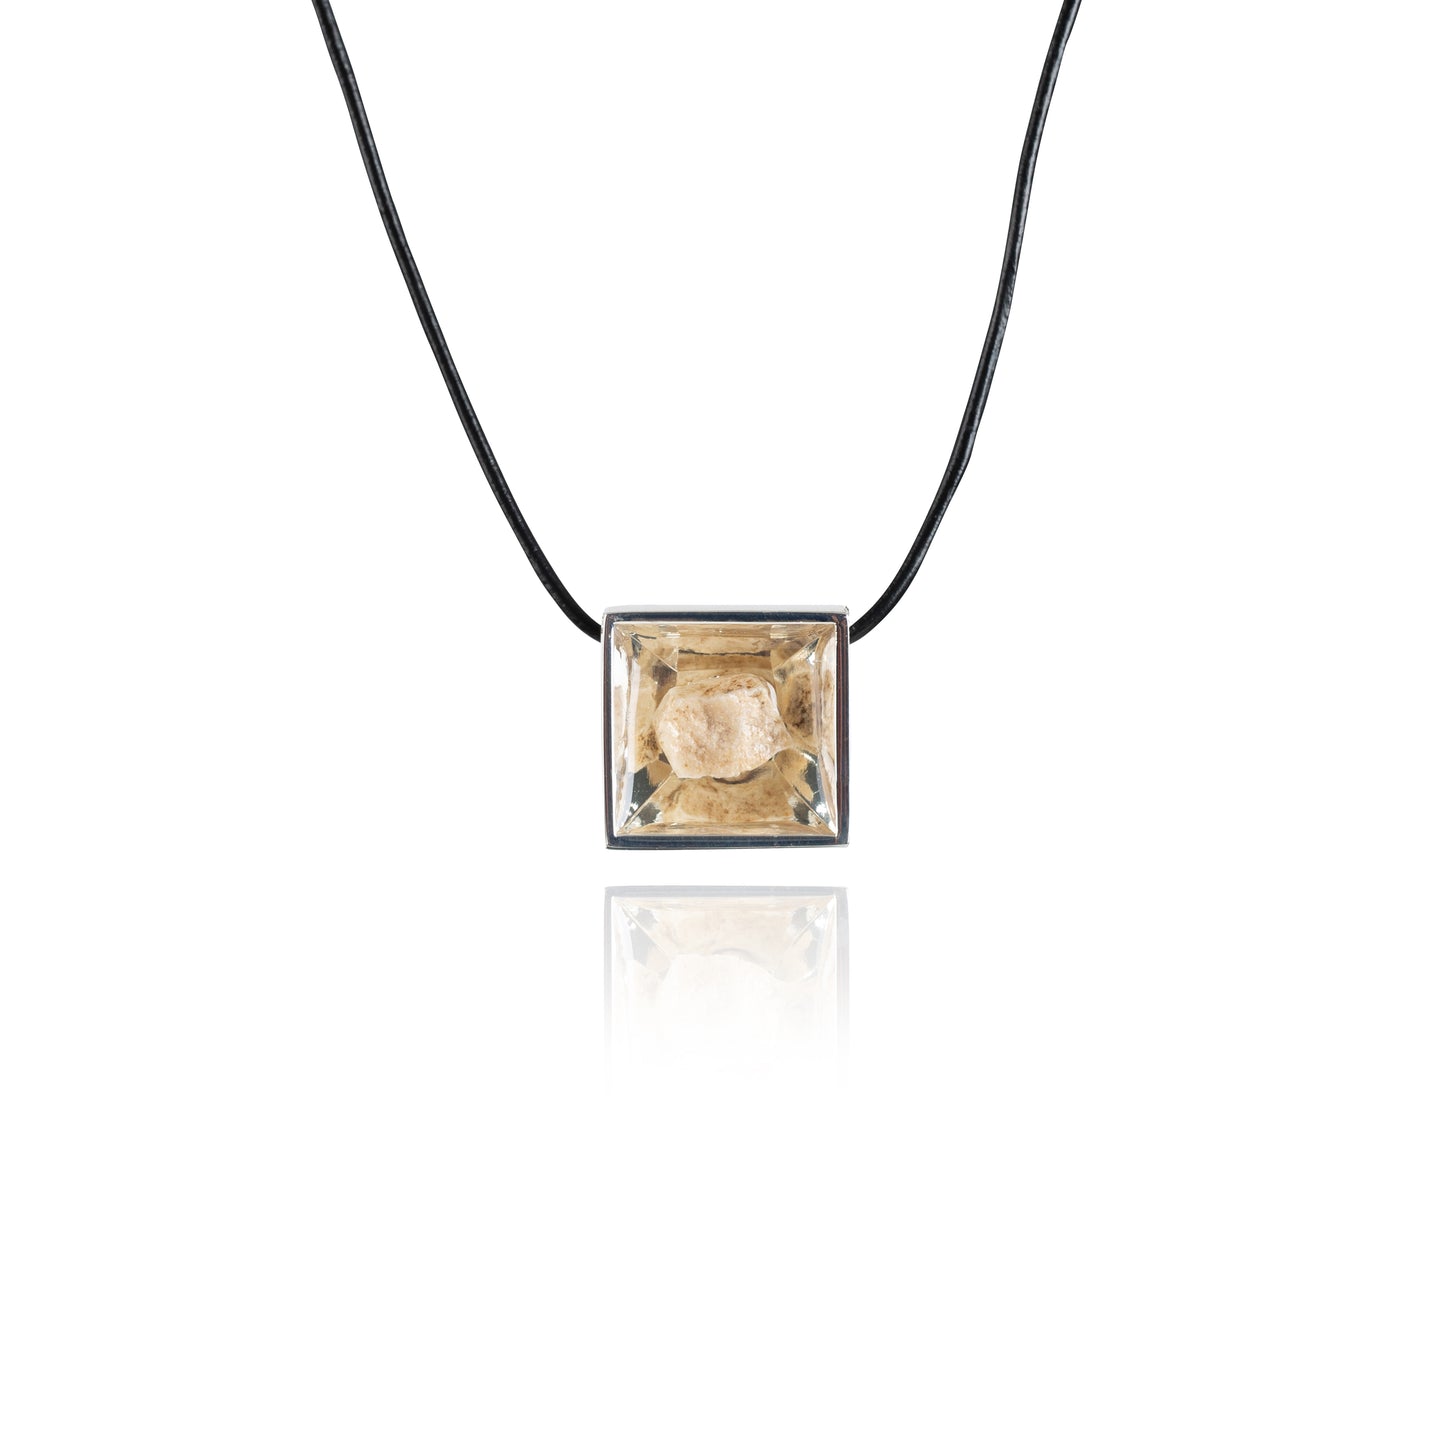 A small natural tan stone sitting in the middle of a square shaped metal pendant in a silver color. The pendant is hanging on a black leather necklace.